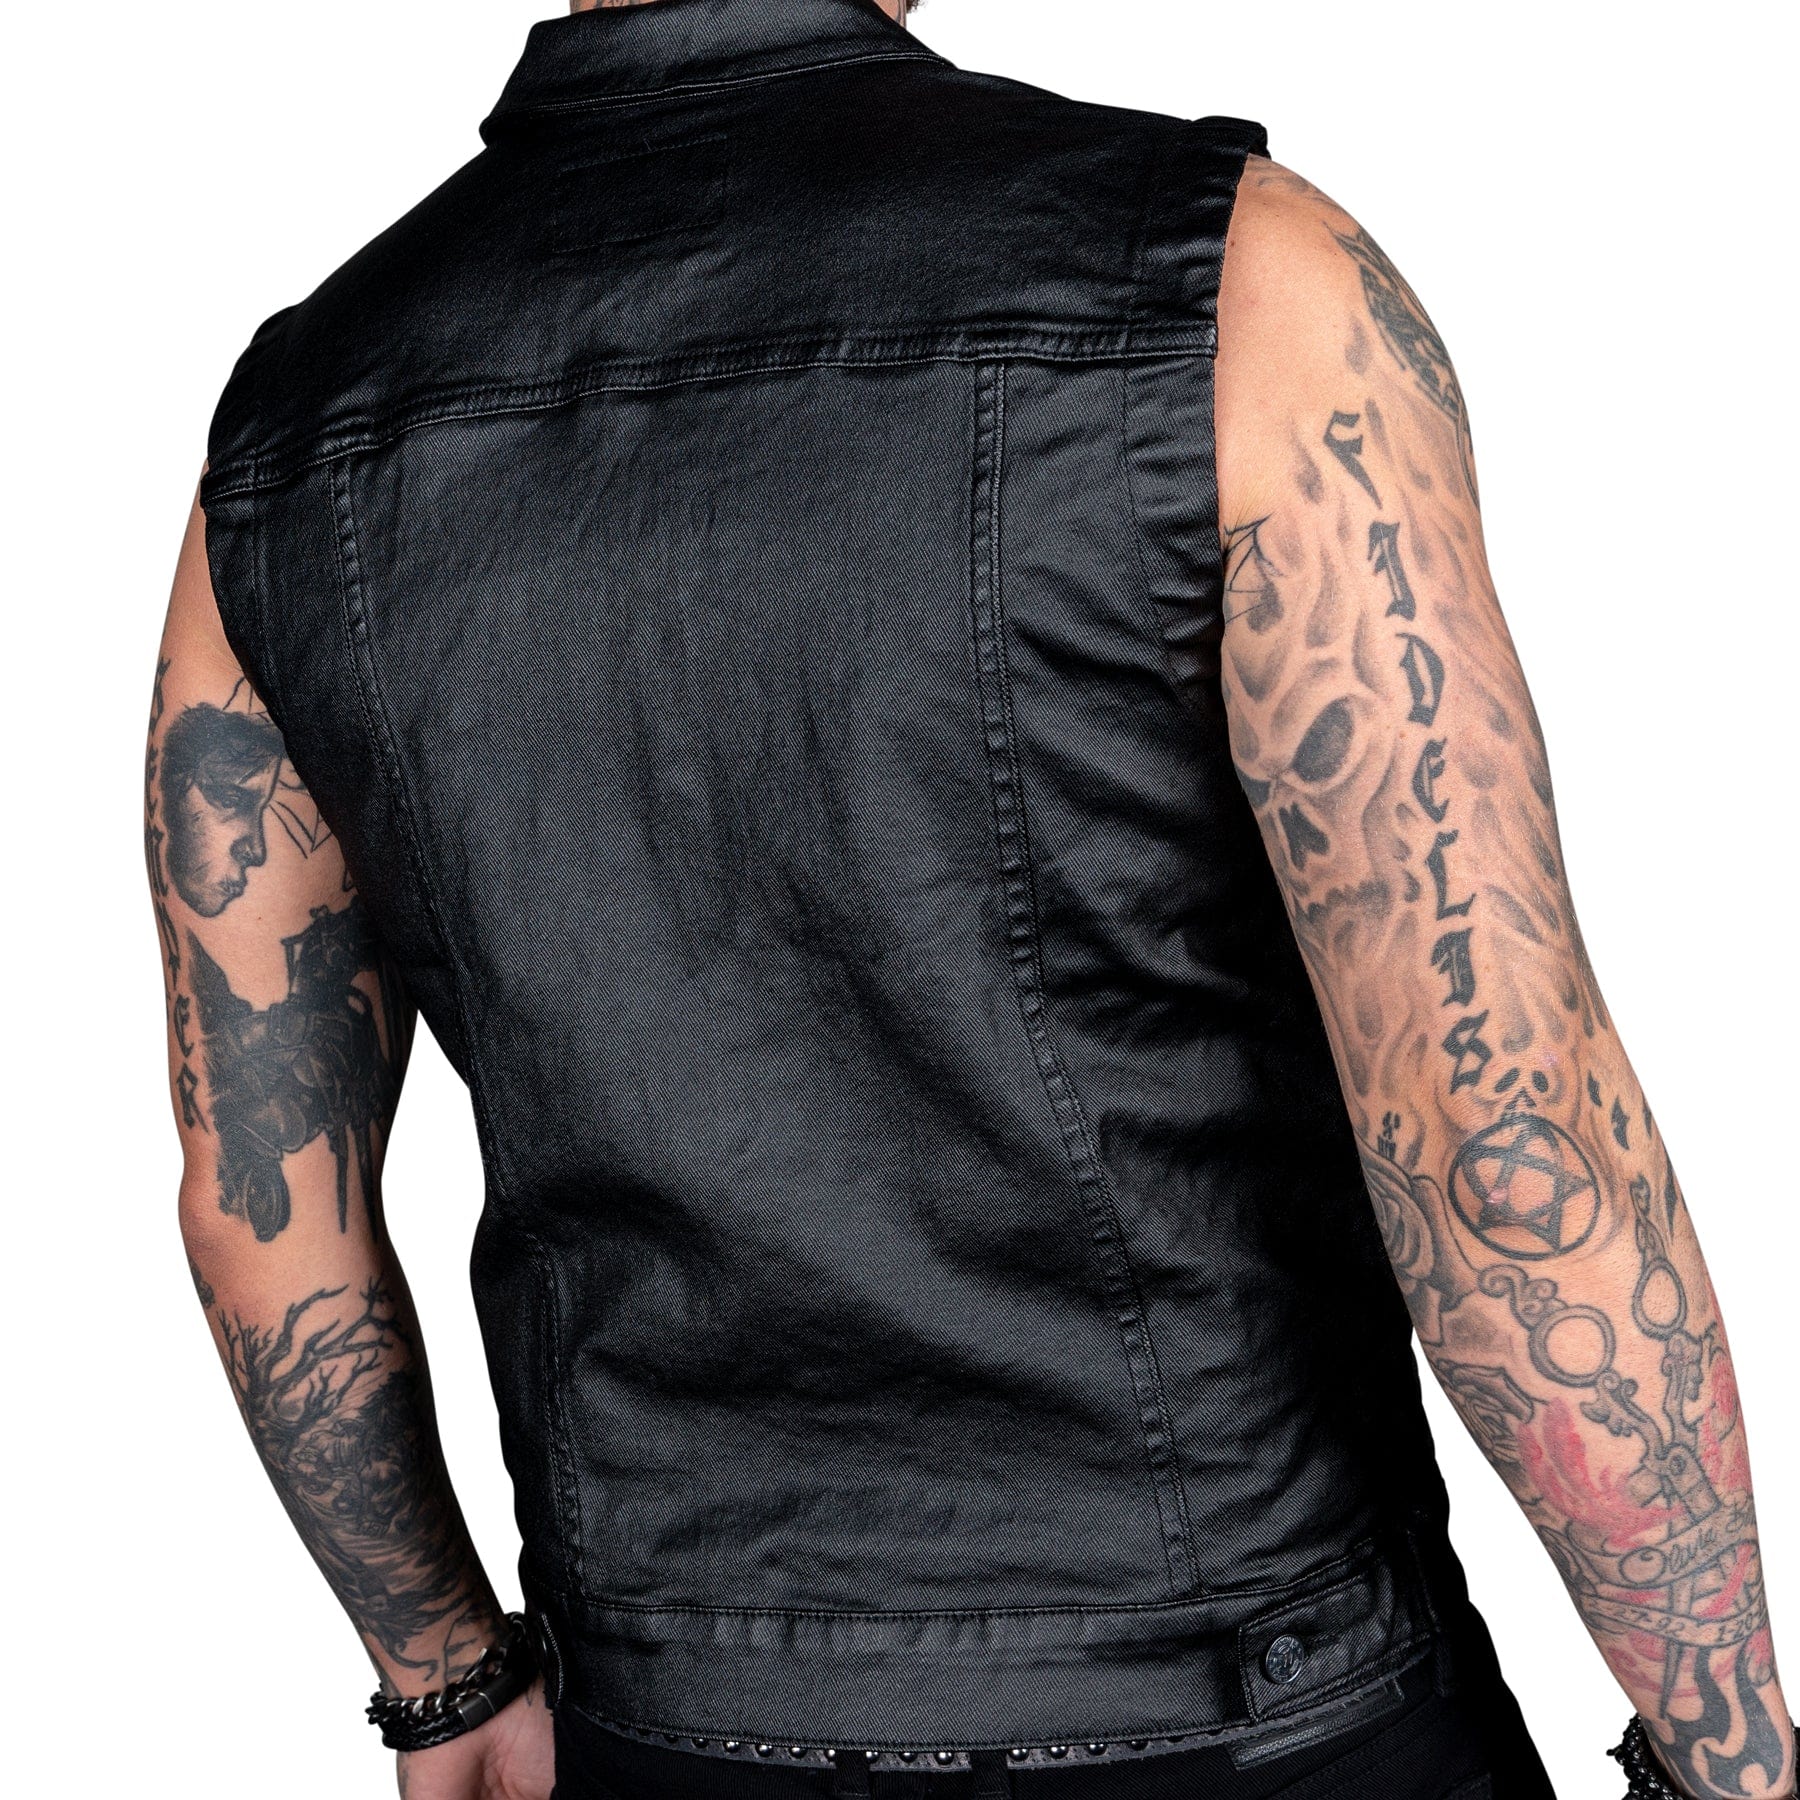 Men Sleeveless Ripped Black Denim Vest - The Western Outfitters